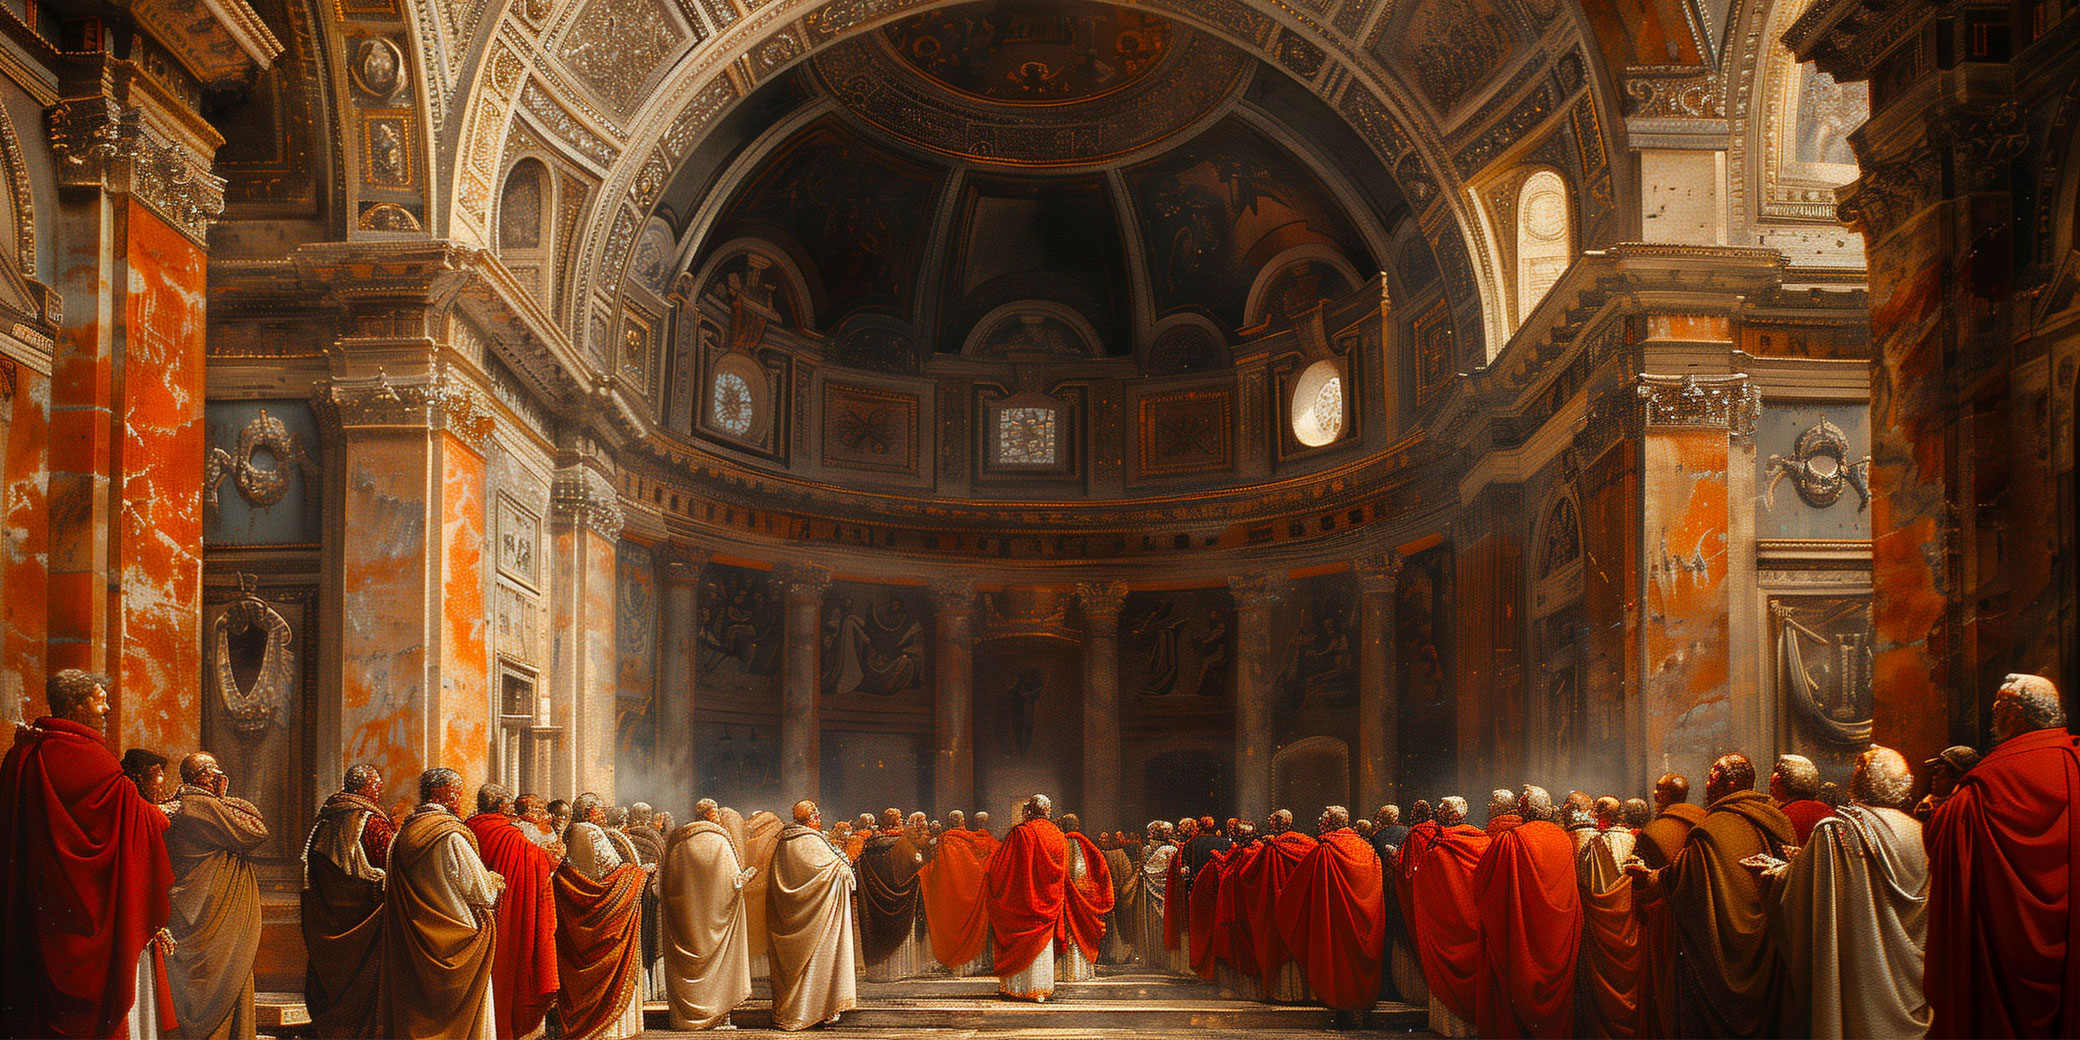 How the Catholic Church's Counter-Reformation responded to the Protestant challenge